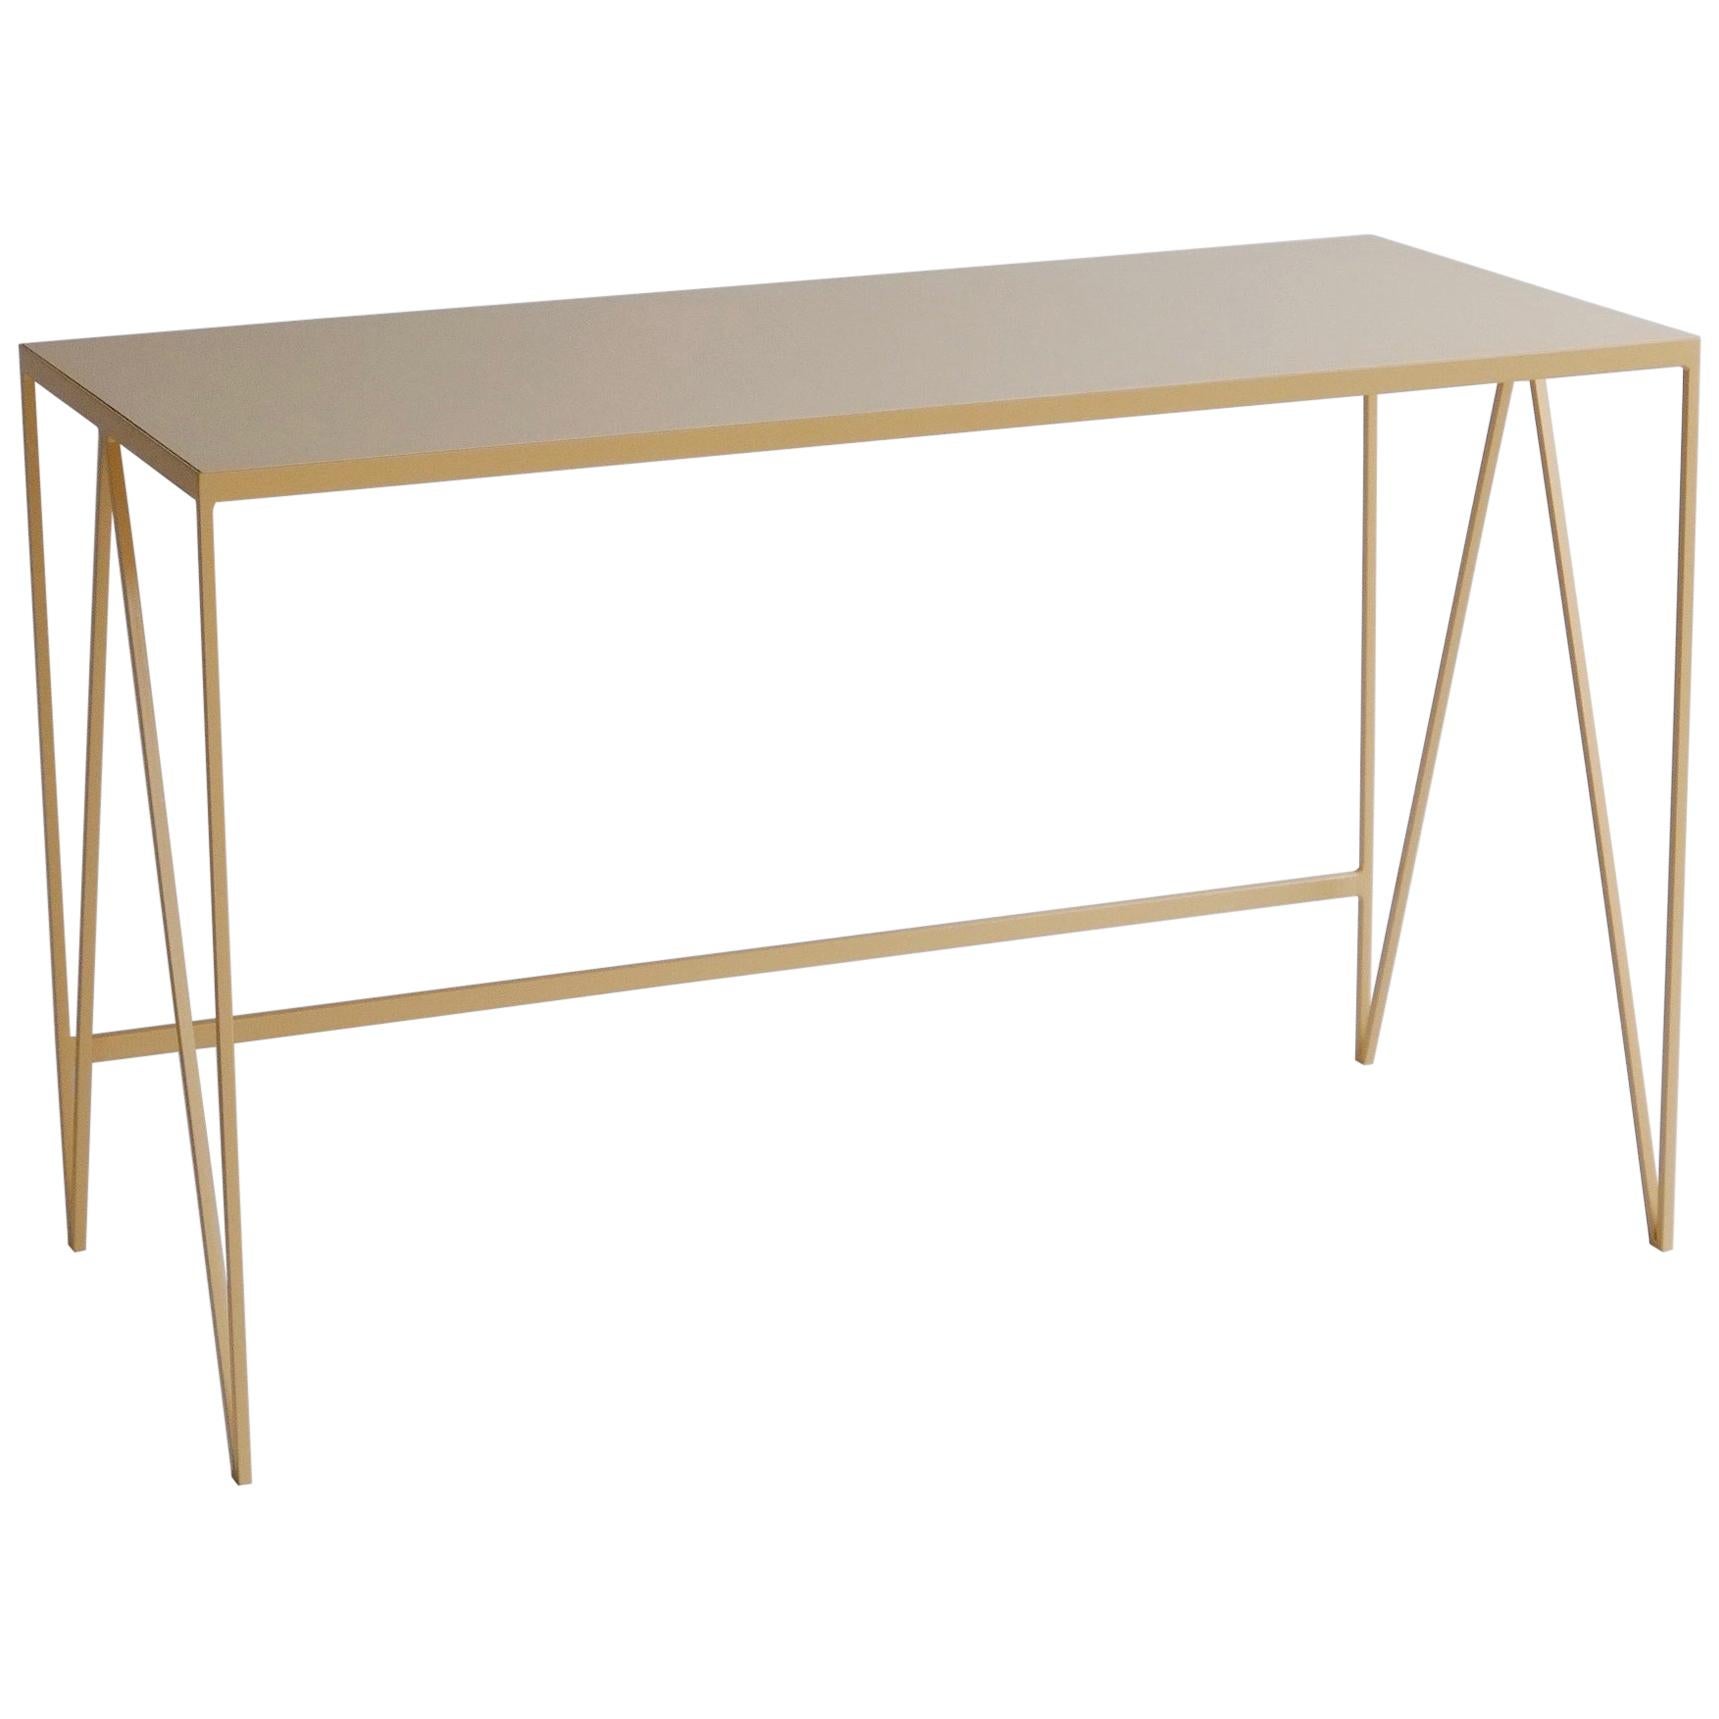 The study desk is made with a butternut powder-coated steel frame and a lacquered birch plywood tabletop. The combination of the natural wood table top and powder coated steel frame has a beautifully warm finish. This compact desk has been designed